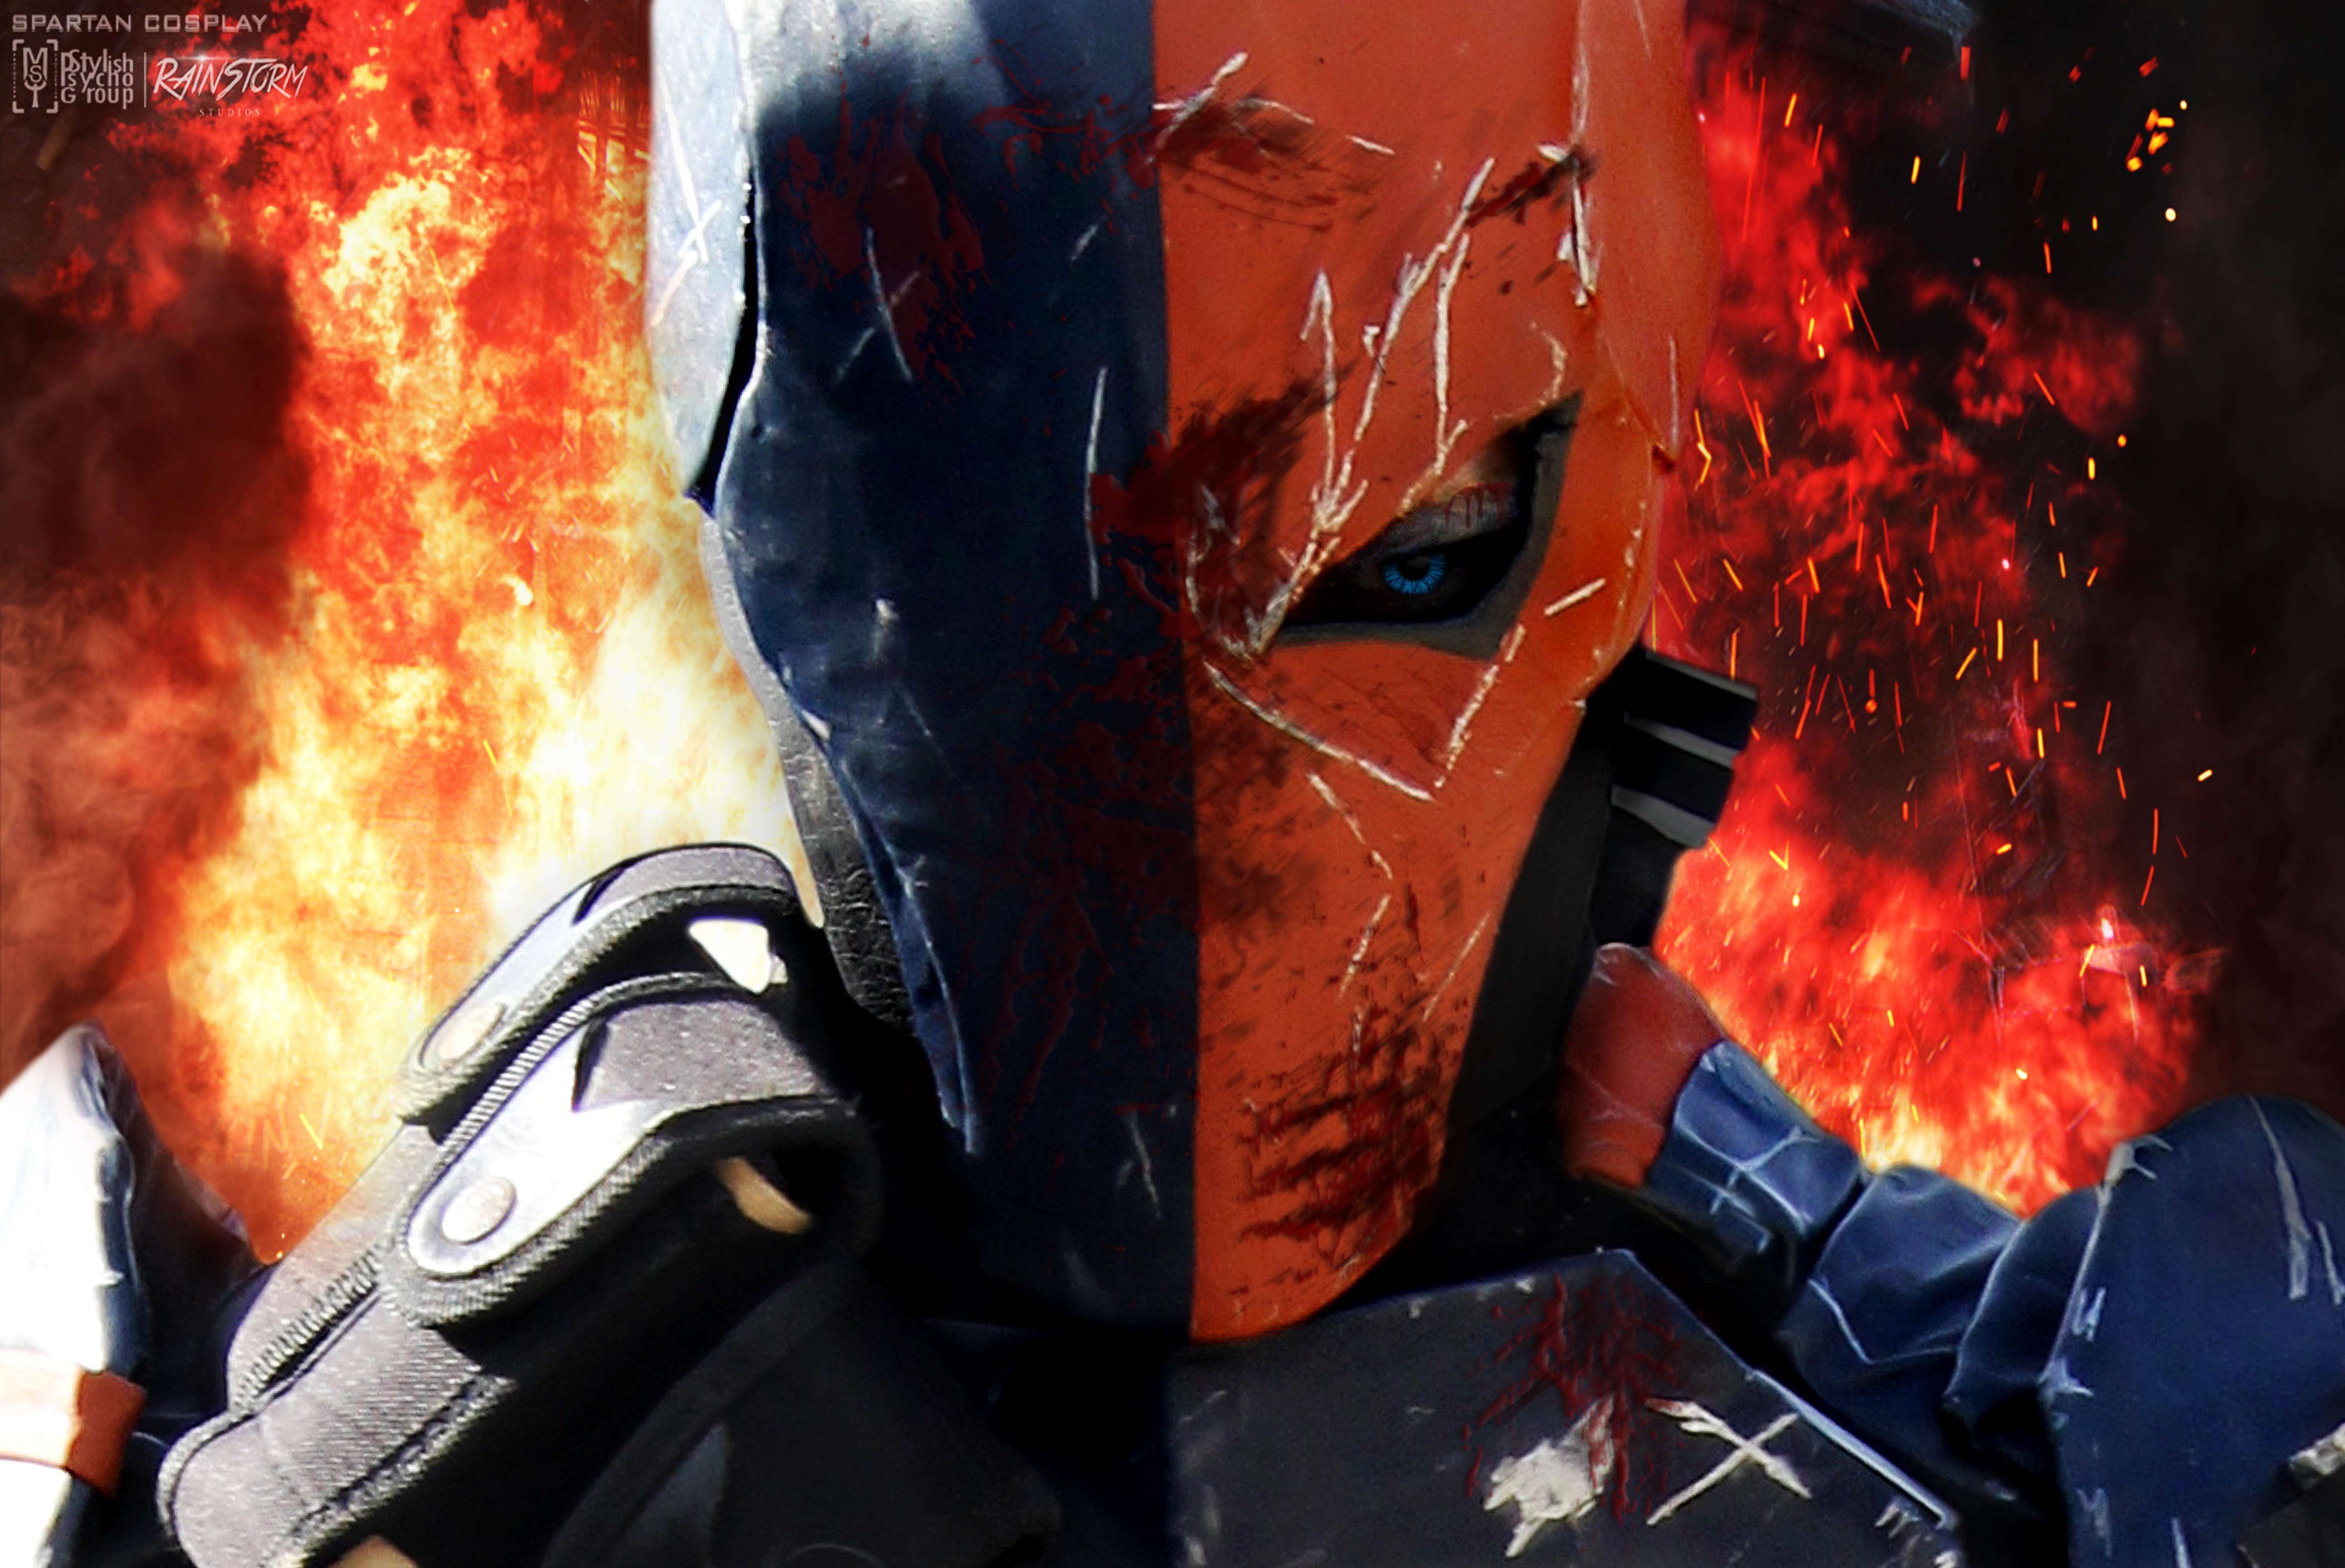 Free Download Slade Deathstroke Wilson Cosplay Wallpaper By Spartanalexandra On 5168x3456 For Your Desktop Mobile Tablet Explore 50 Deathstroke Wallpapers Batman Arkham Origins Wallpaper Origin Wallpaper This category contains images of the character, slade wilson. wallpapersafari